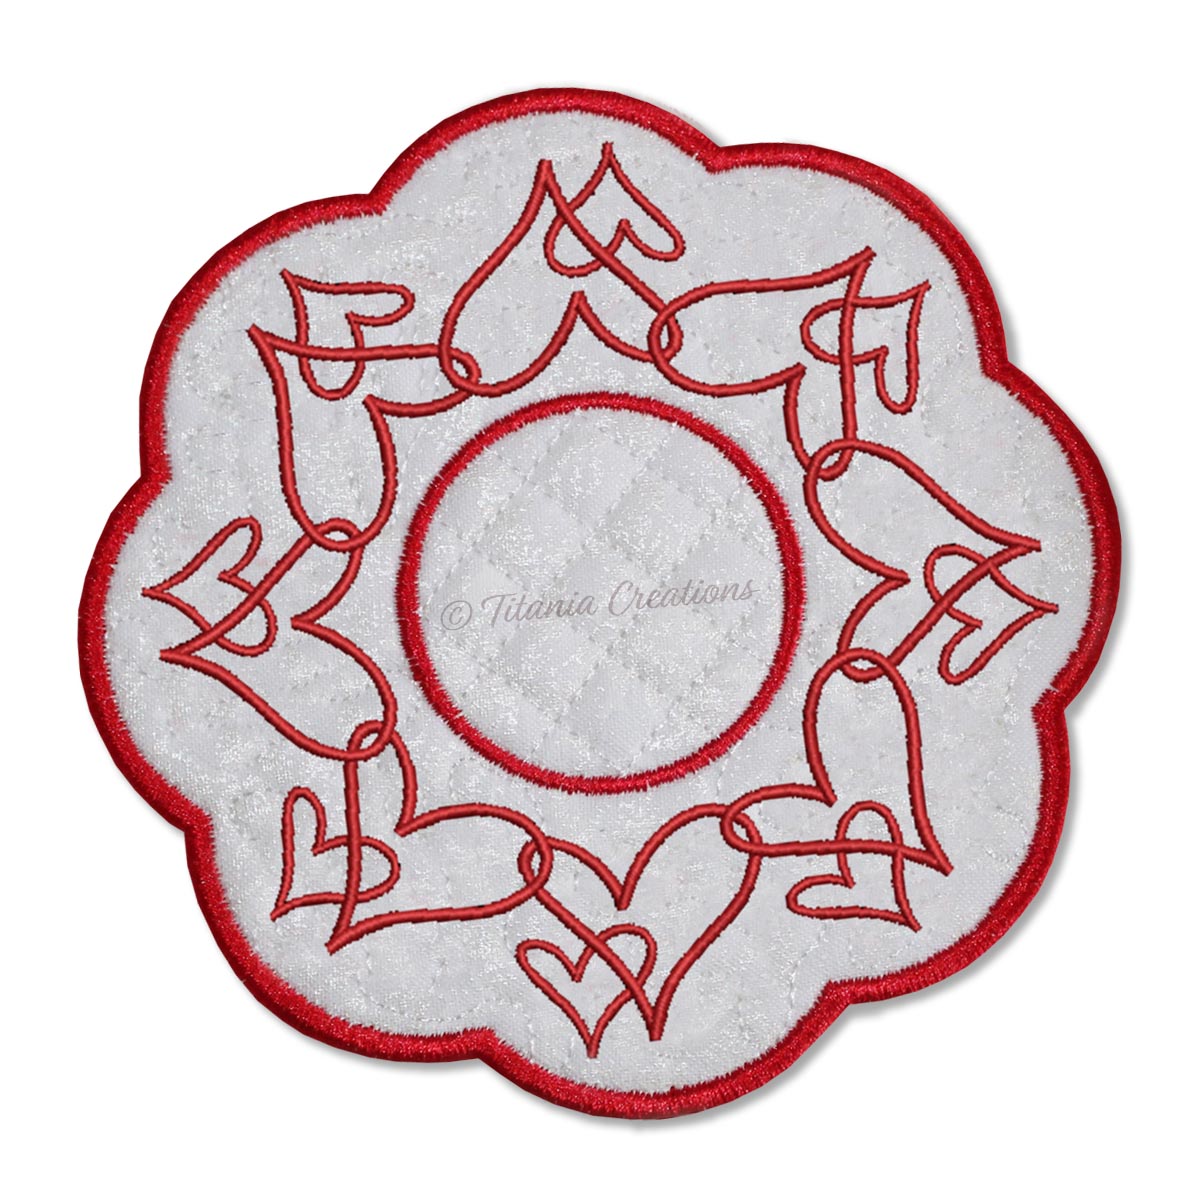 ITH Heart Candle Mat 5x5 6x6 7x7 8x8